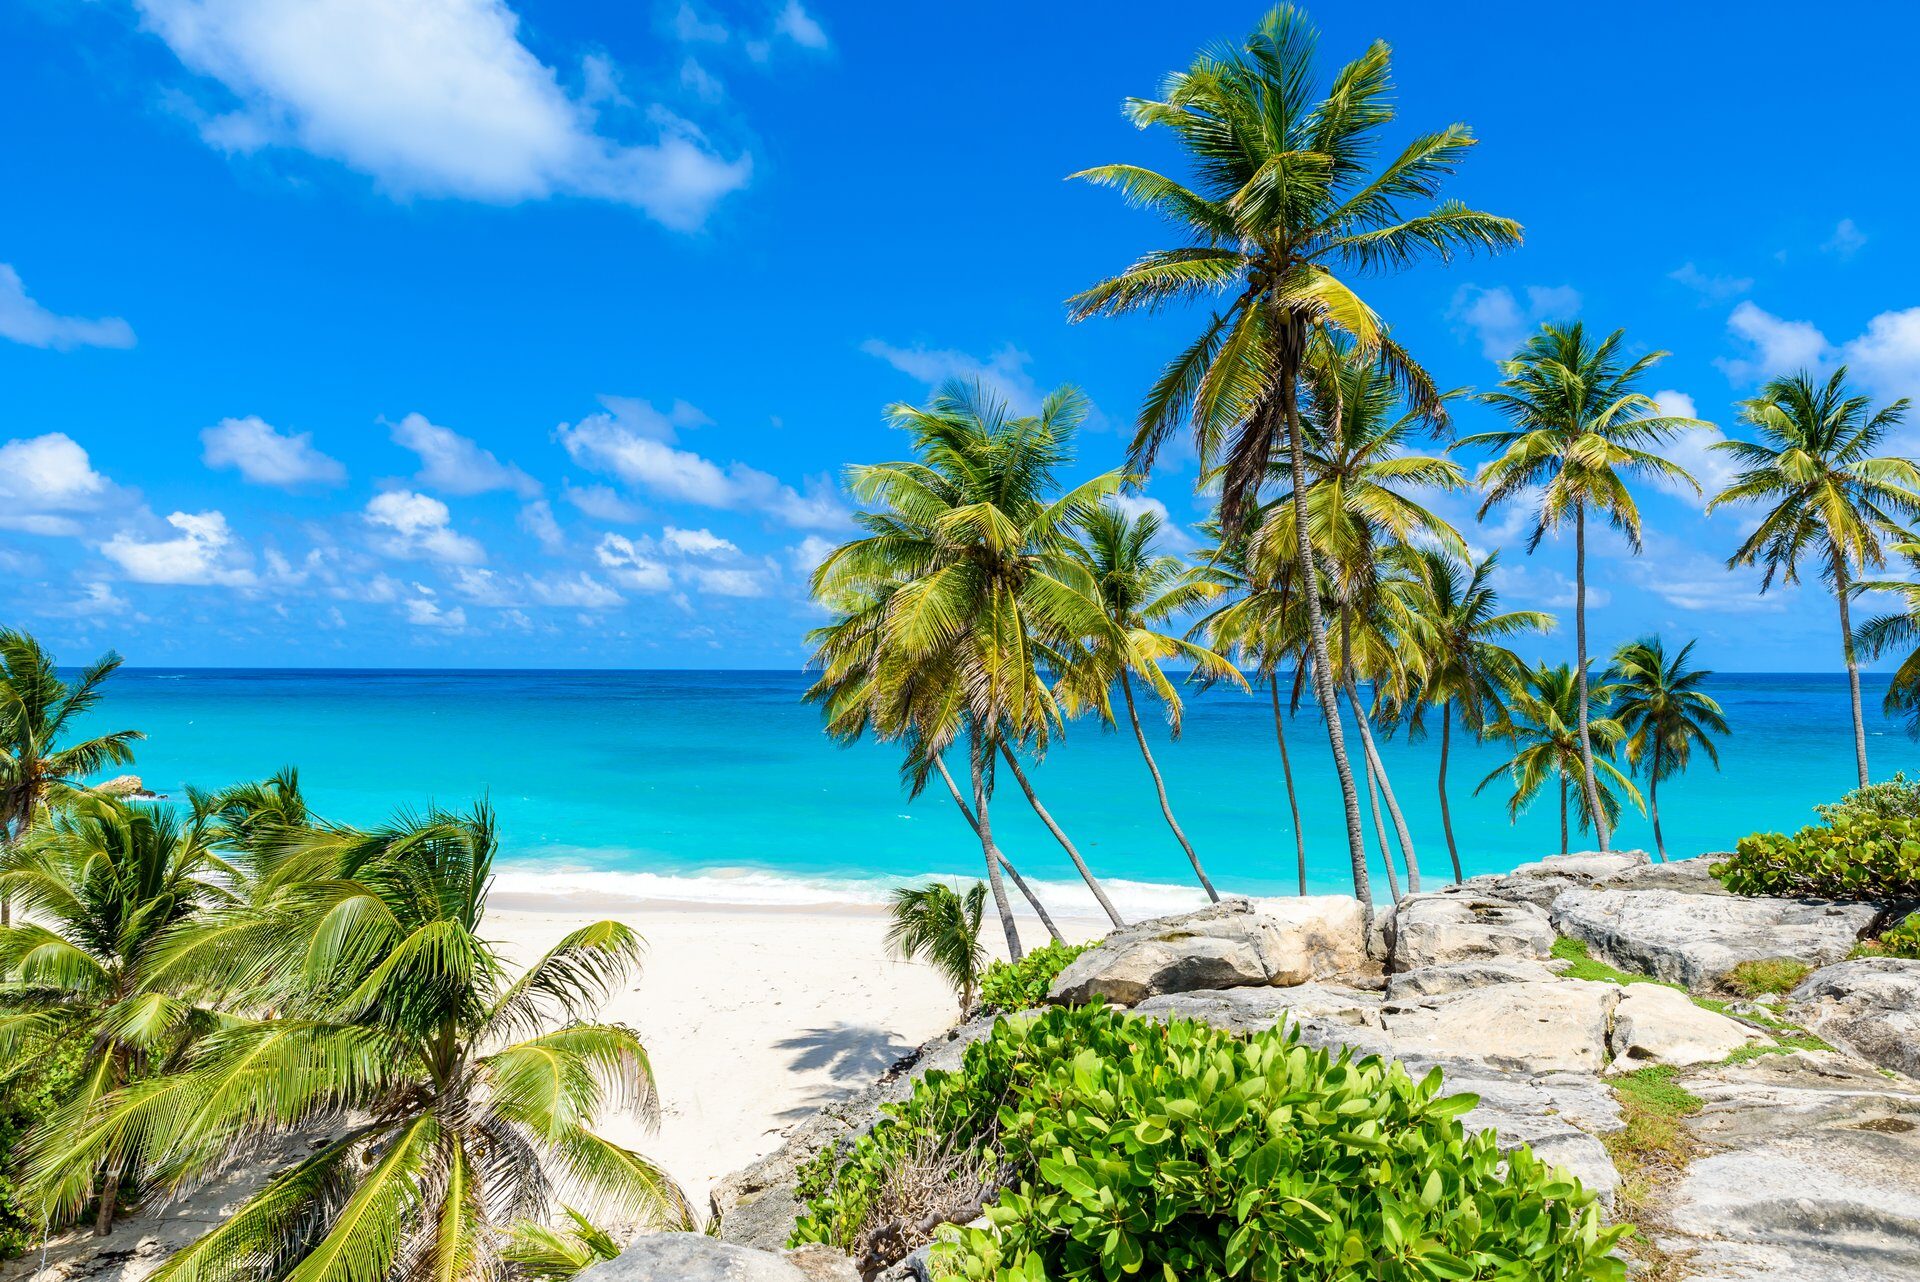 14 Best Beaches In Barbados Celebrity Cruises - Bank2home.com